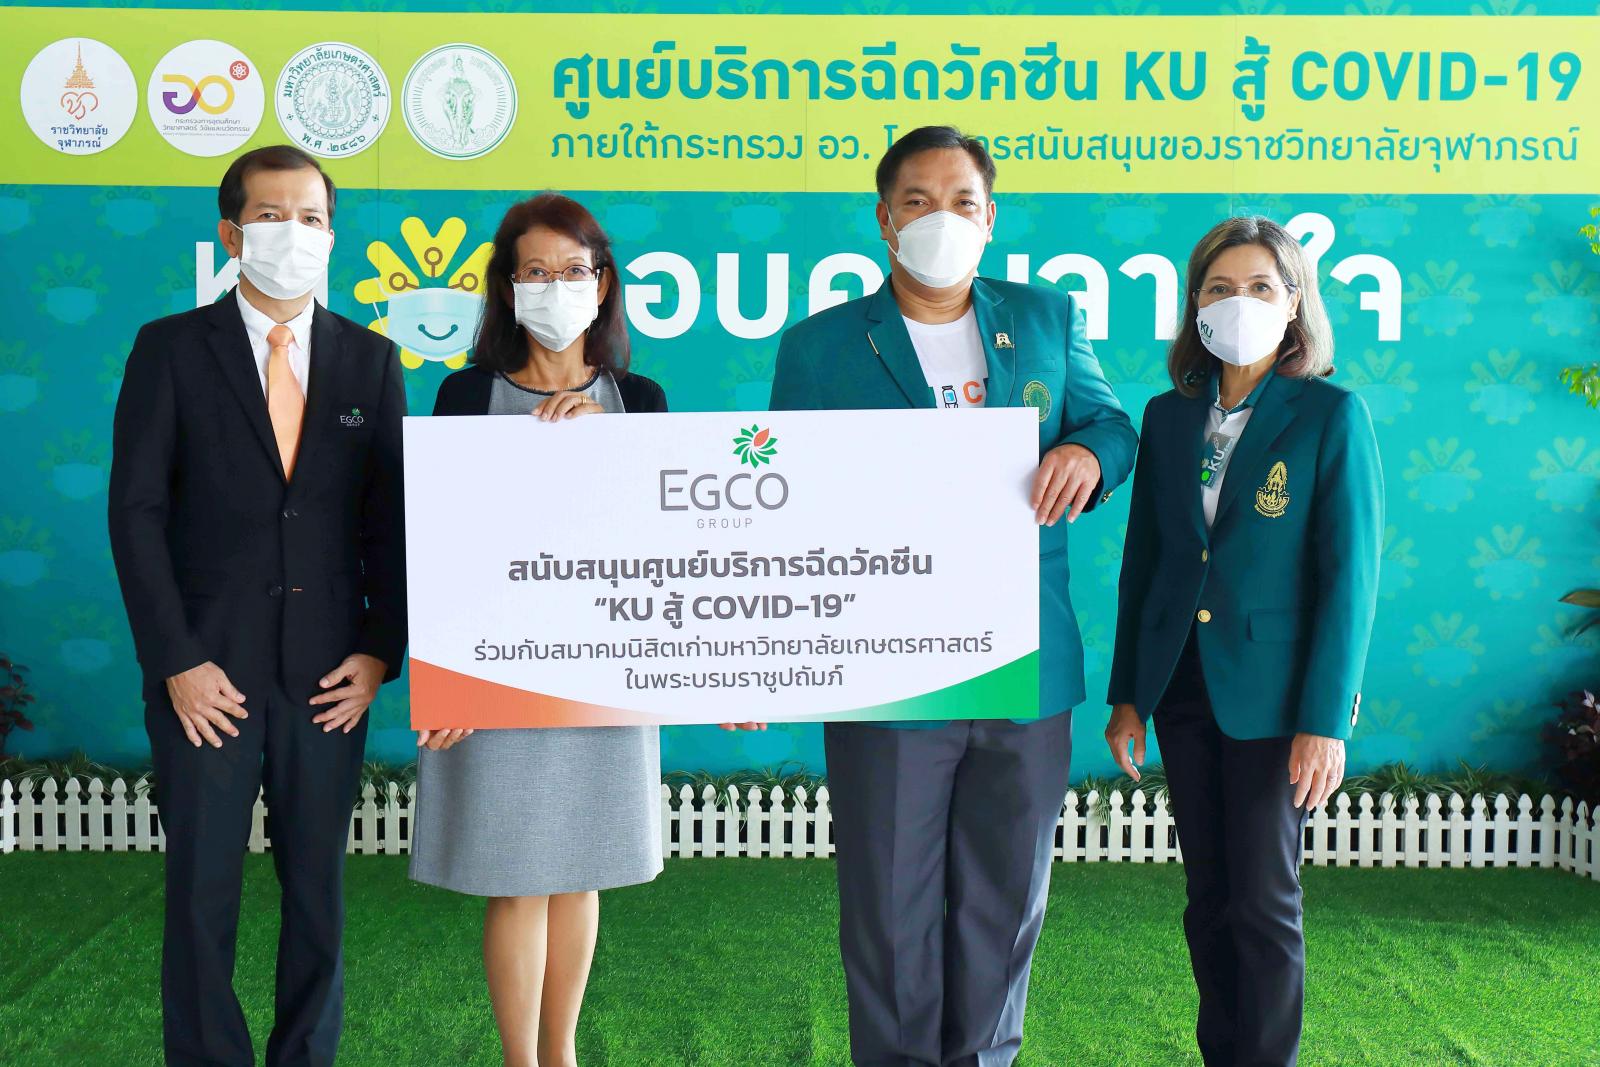 EGCO Group supports vaccination service centers “Ku Fights Covid-19” to build immunization in Thailand